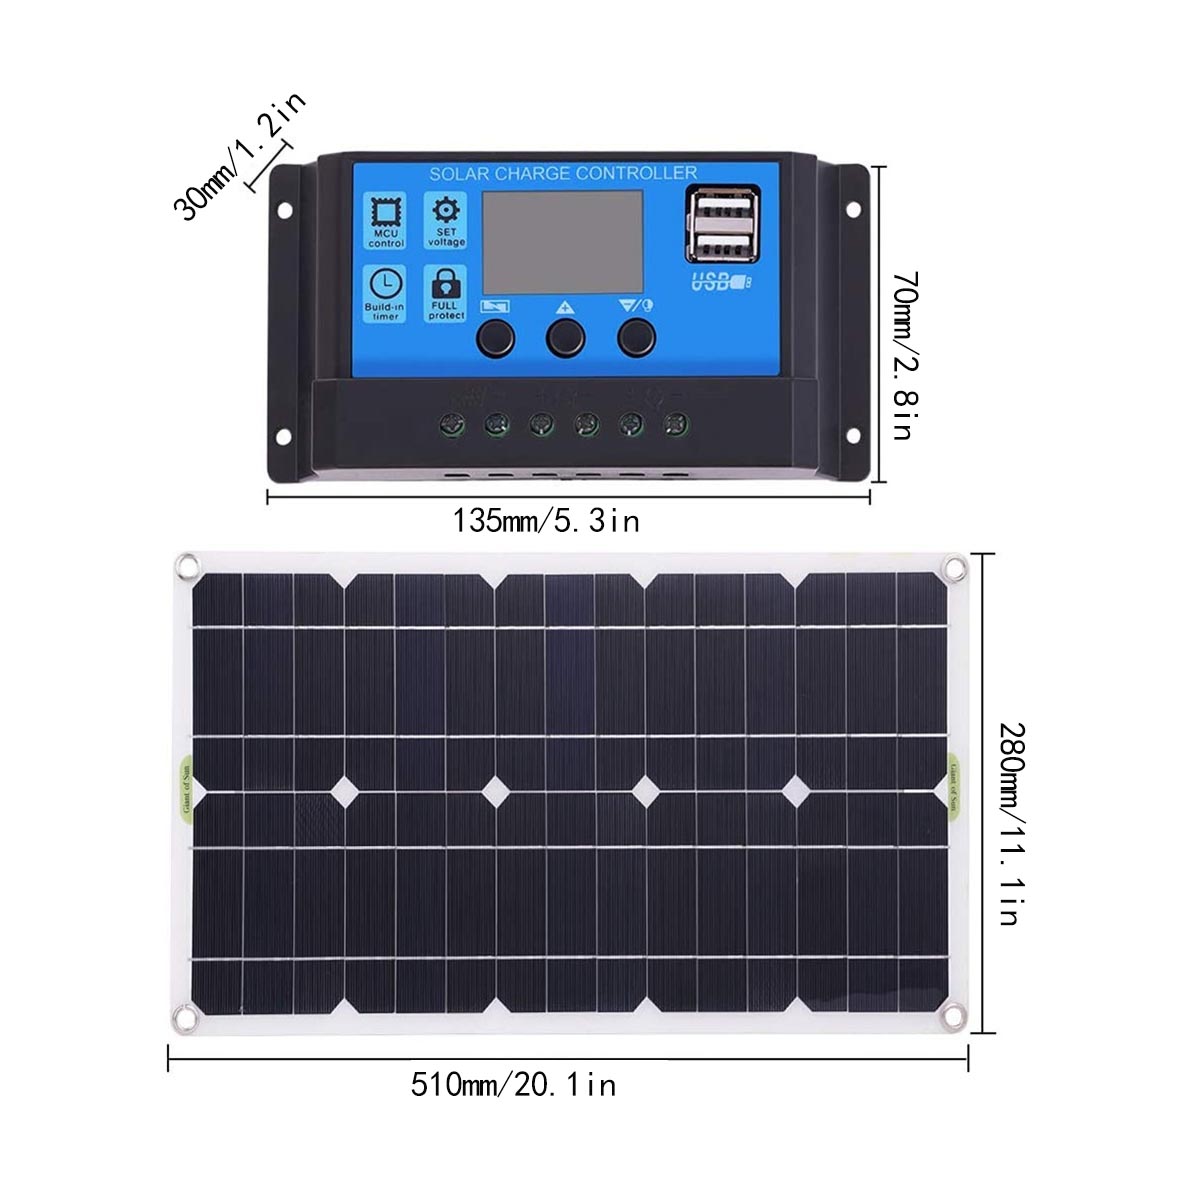 100W-Max-50W-Battery-Dual-USB-Charger-Solar-Panel-Controller-W-Clip-Kits-Motorhome-Boats-Car-1847884-7